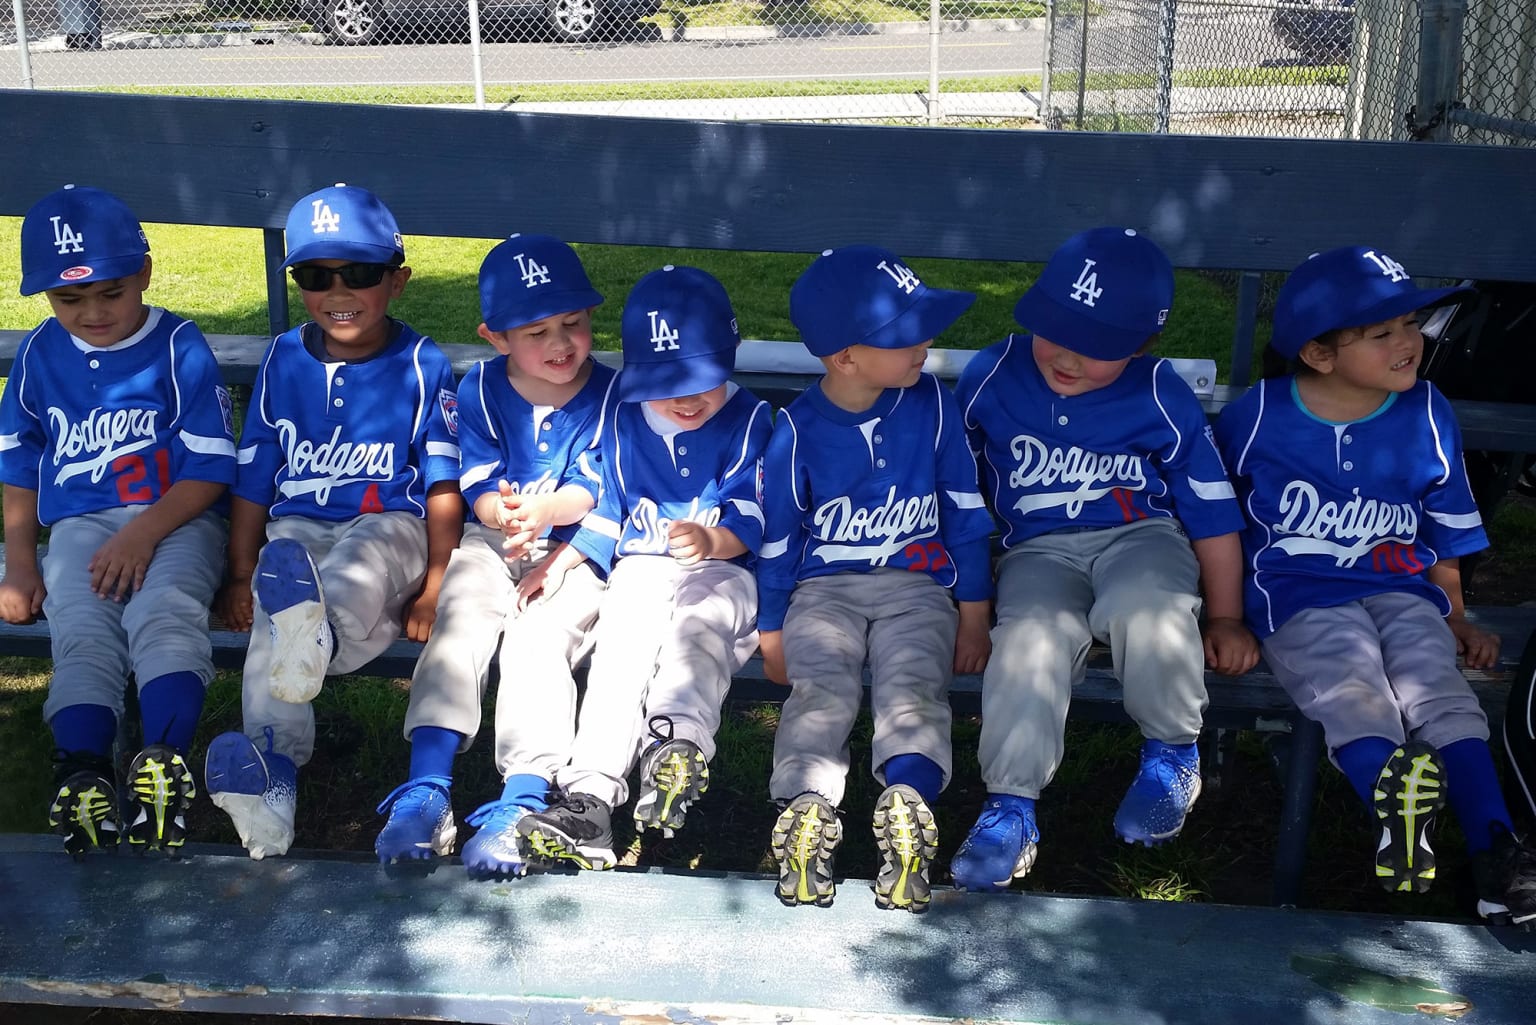 Little League - These Little Leaguers look ready for the